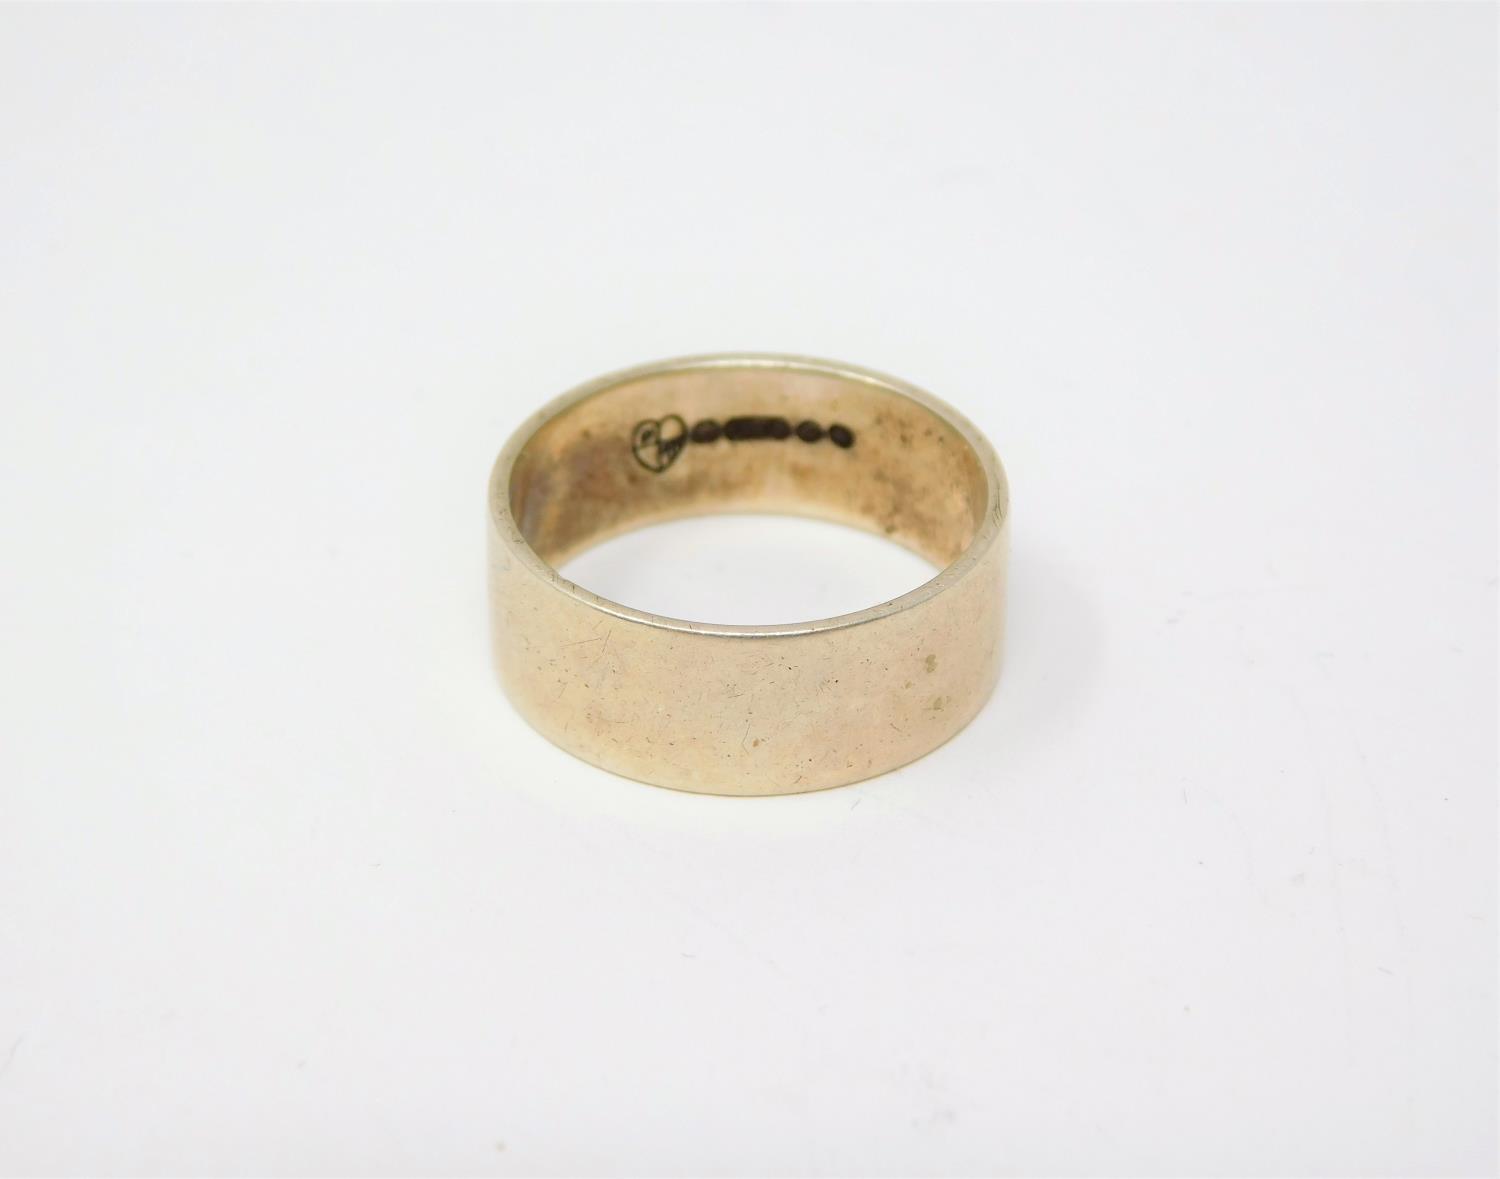 A 9ct yellow gold flat band, hallmarked 375, makers mark FW in a quartered heart for F. Mansure